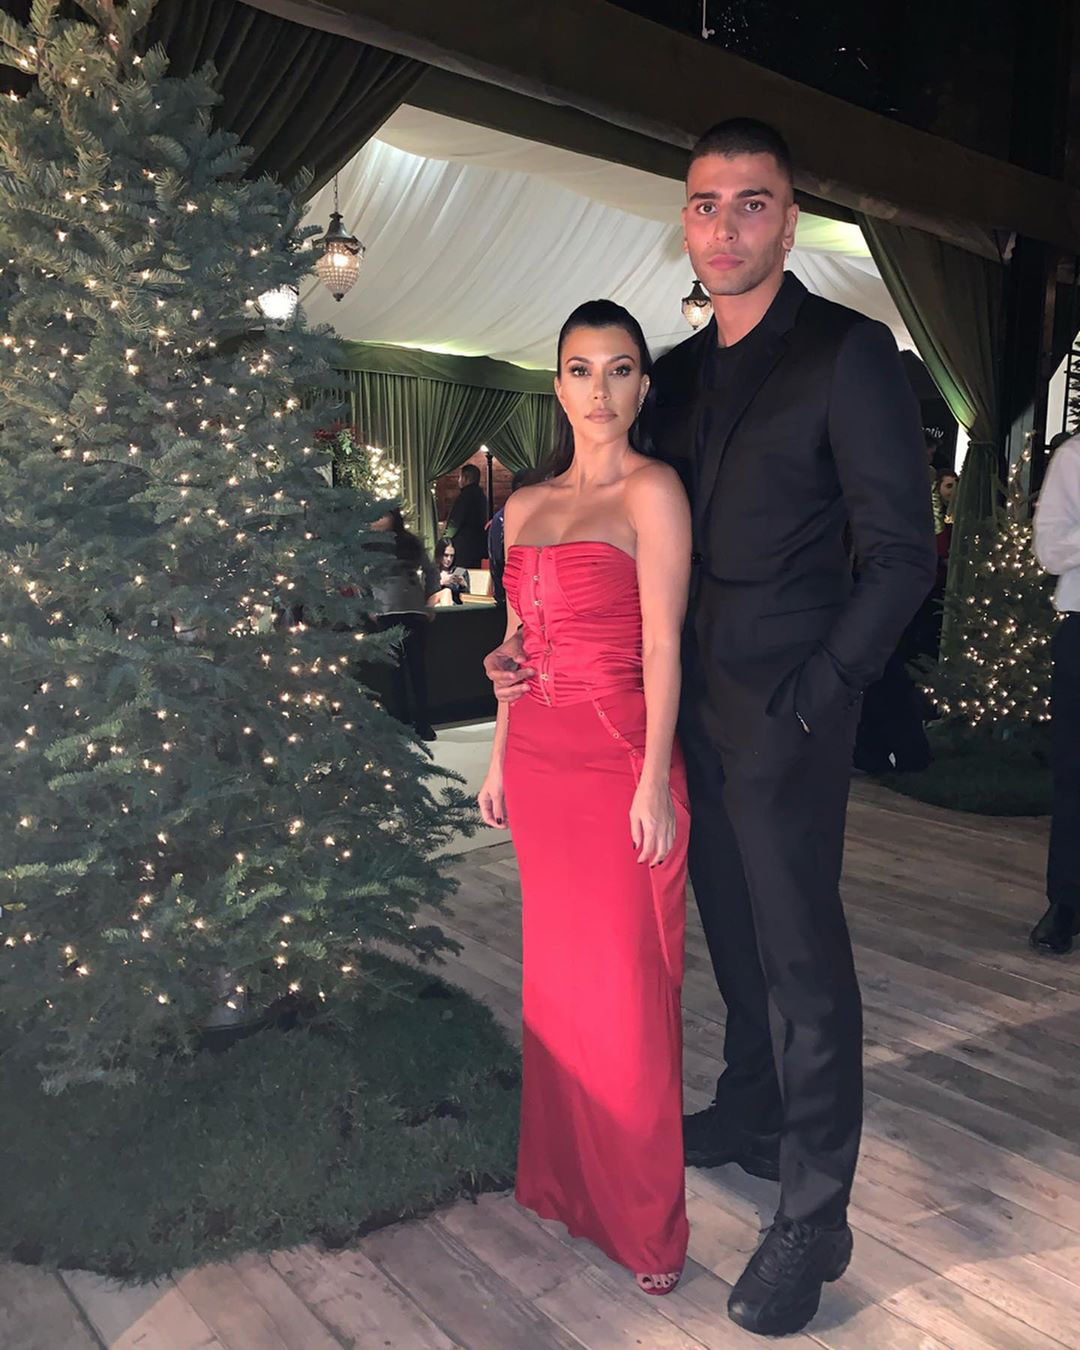 This Year’s KardashianJenner Christmas Party See the Pics